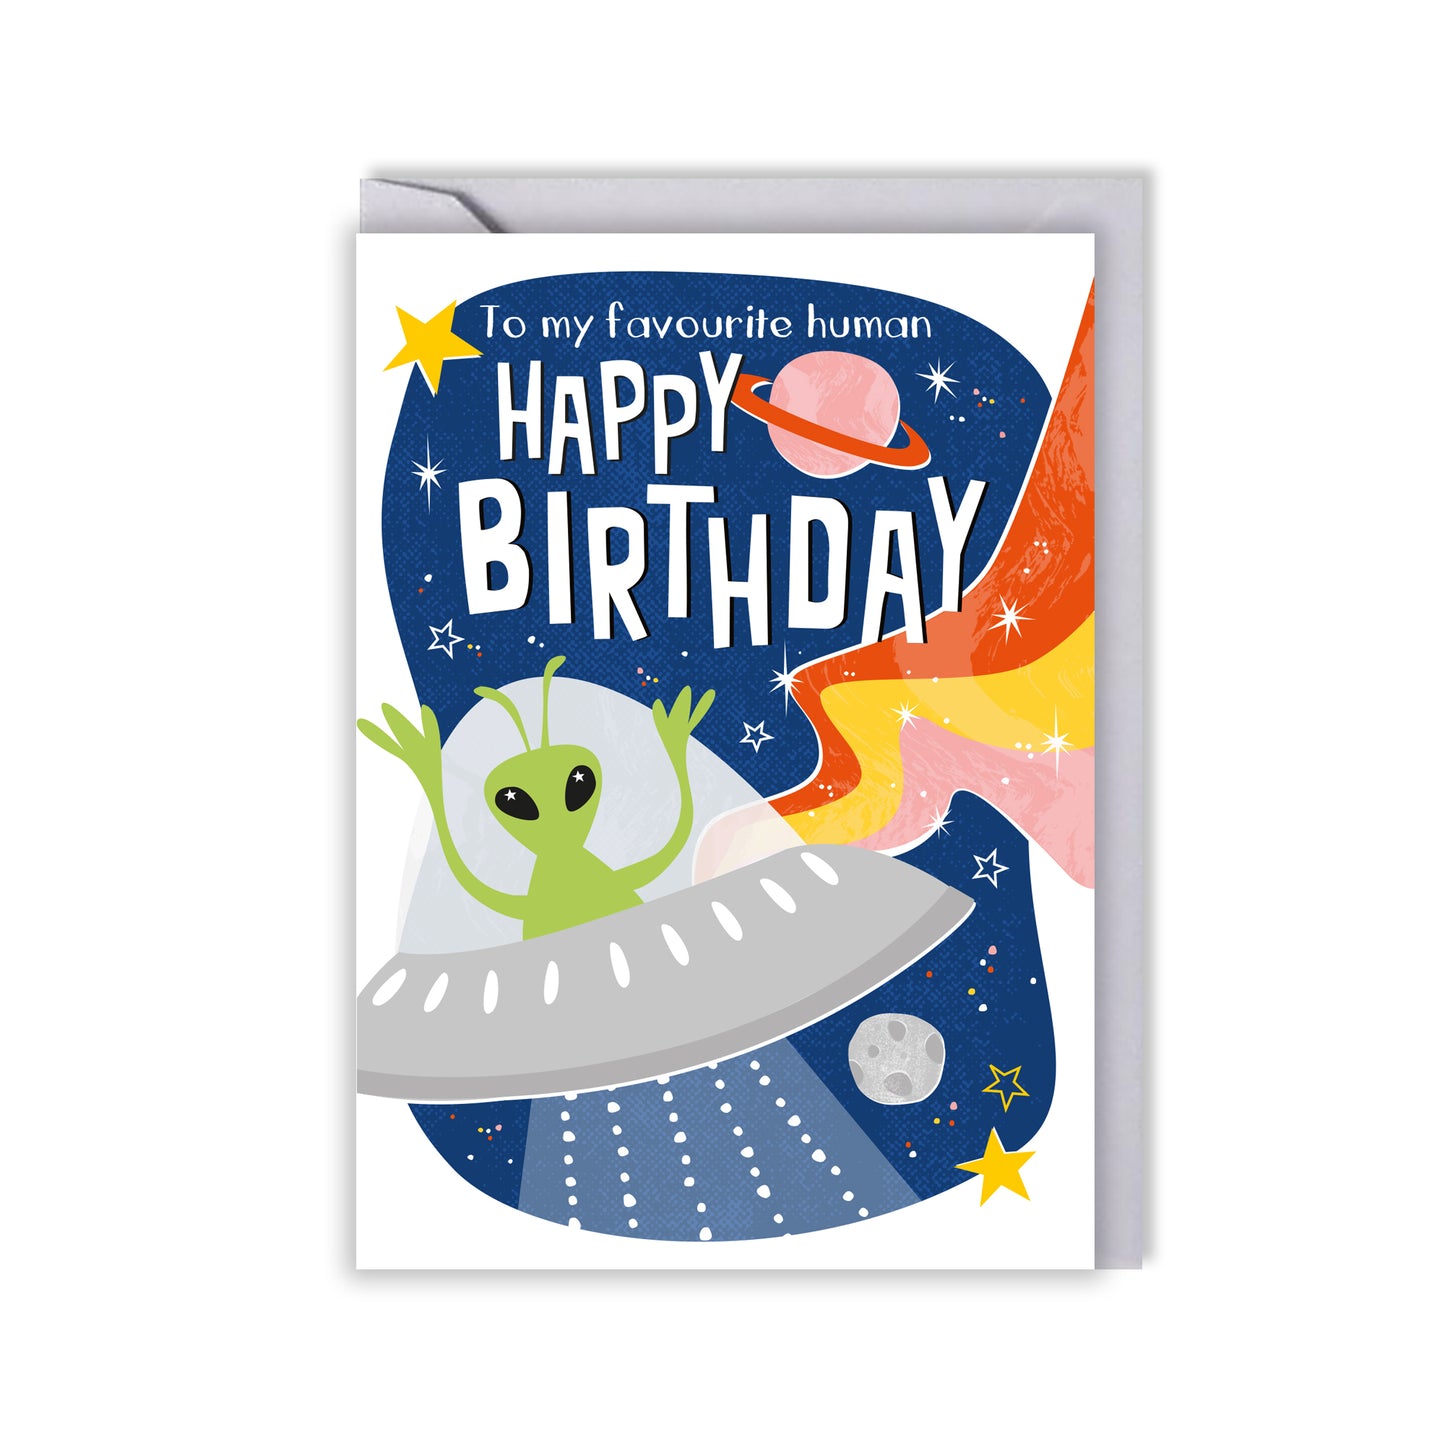 Space Birthday Card - To my favourite human